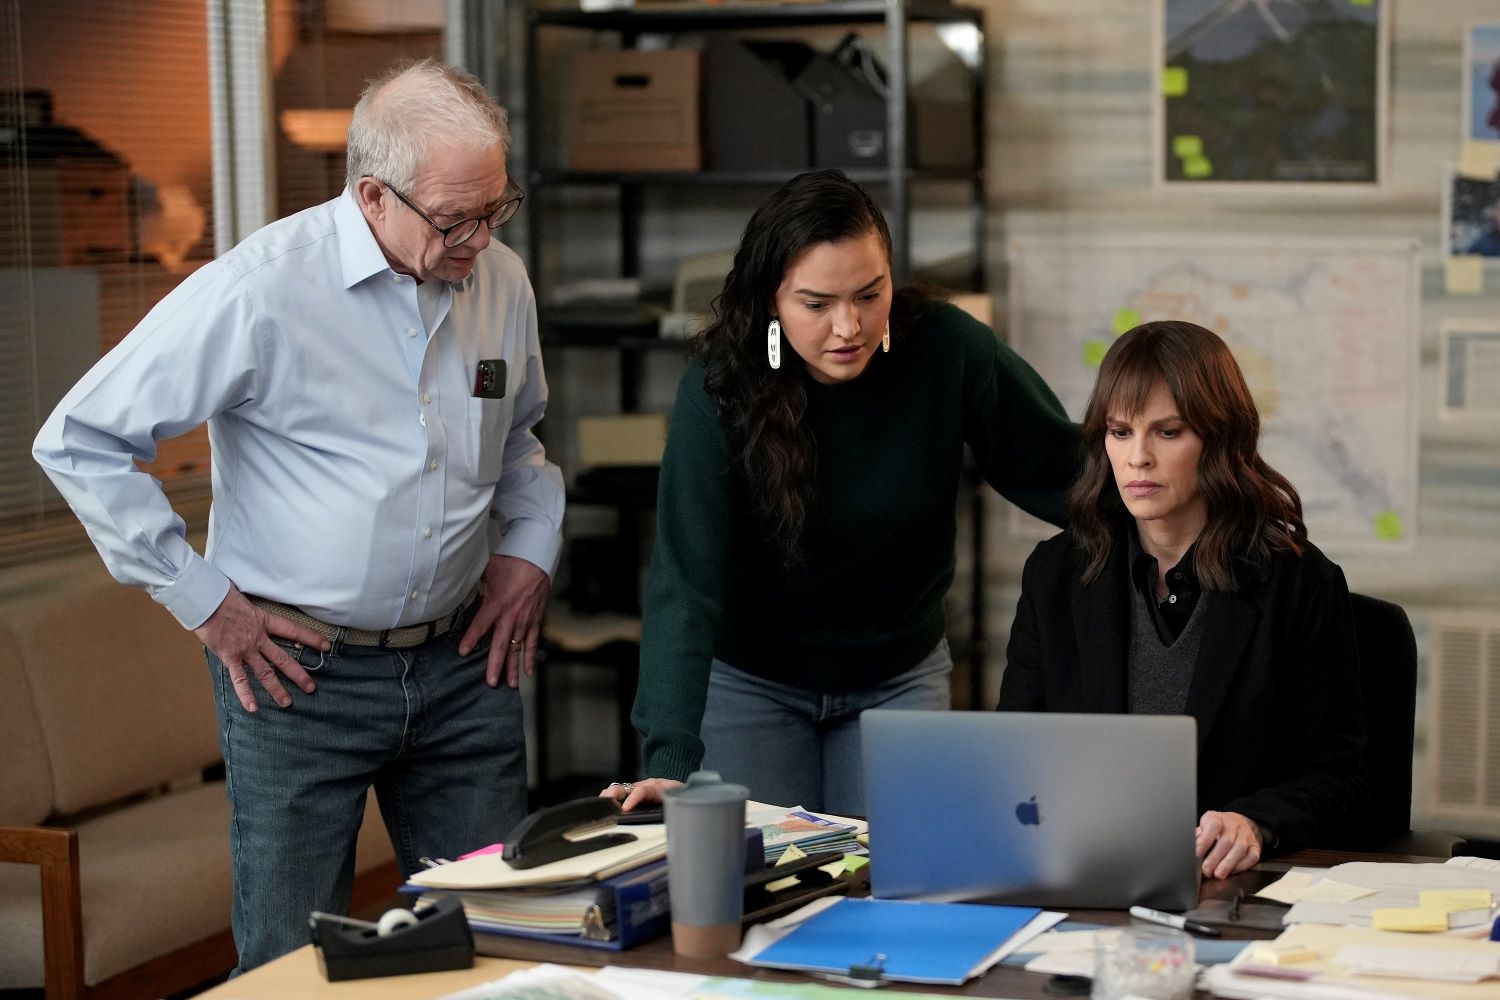 Jeff Perry as Stanley, Grace Dove as Roz, and Hilary Swank as Eileen share a scene in 'Alaska Daily' Episode 11. Stanley wears a light blue button-up shirt and jeans. Roz wear a dark green sweater and jeans. Eileen wears a black coat over a gray sweater vest over a black button-up shirt.